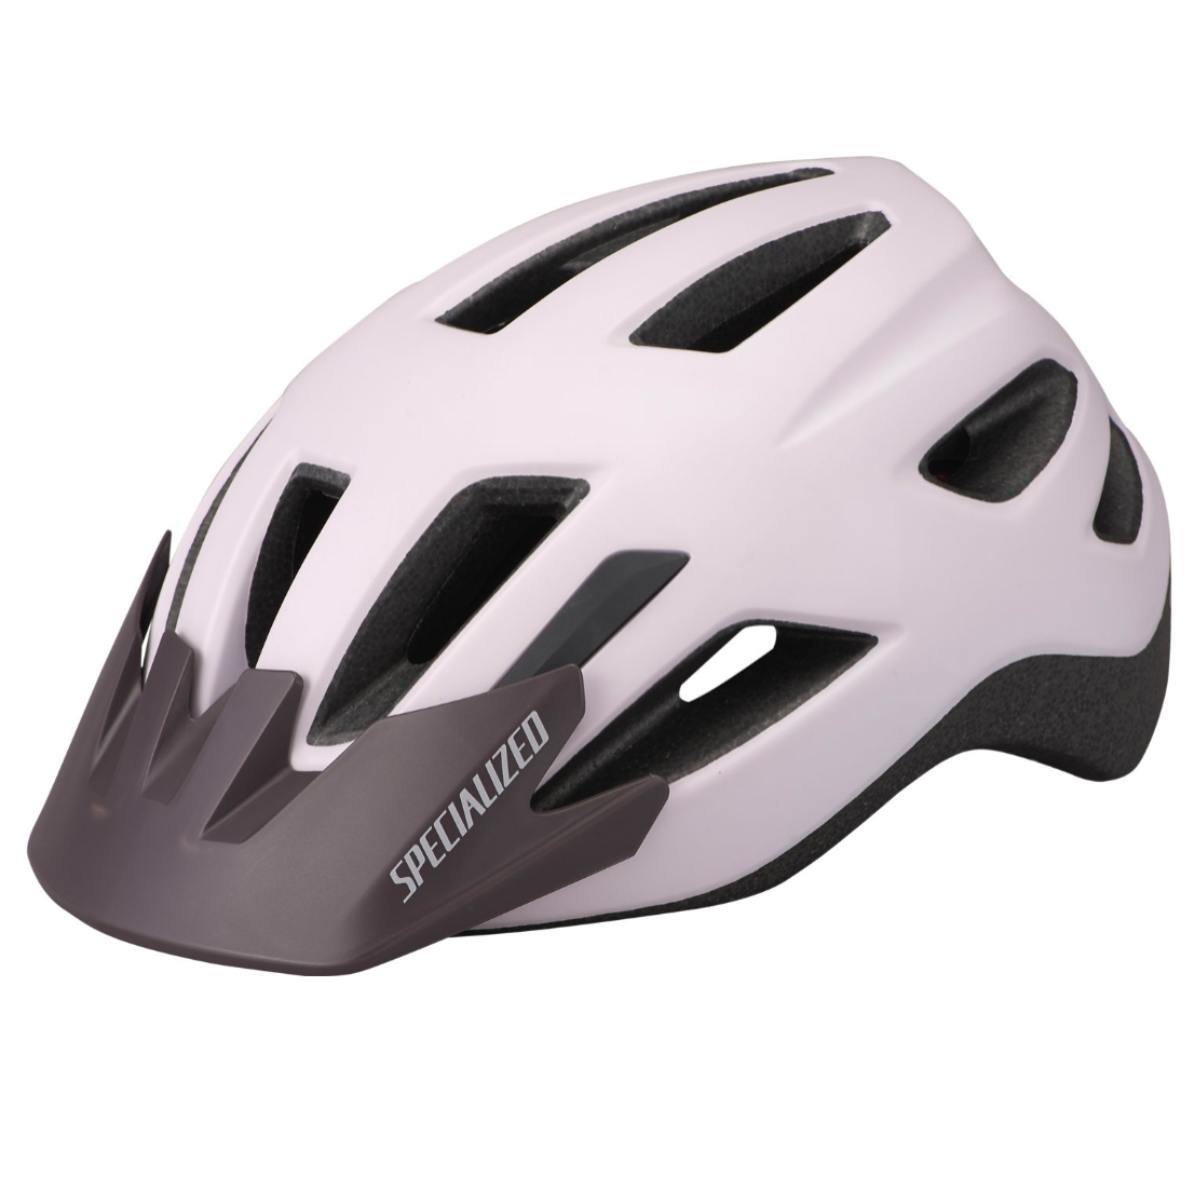 CASQUE SPECIALIZED SHUFFLE YOUTH GRIS PALE